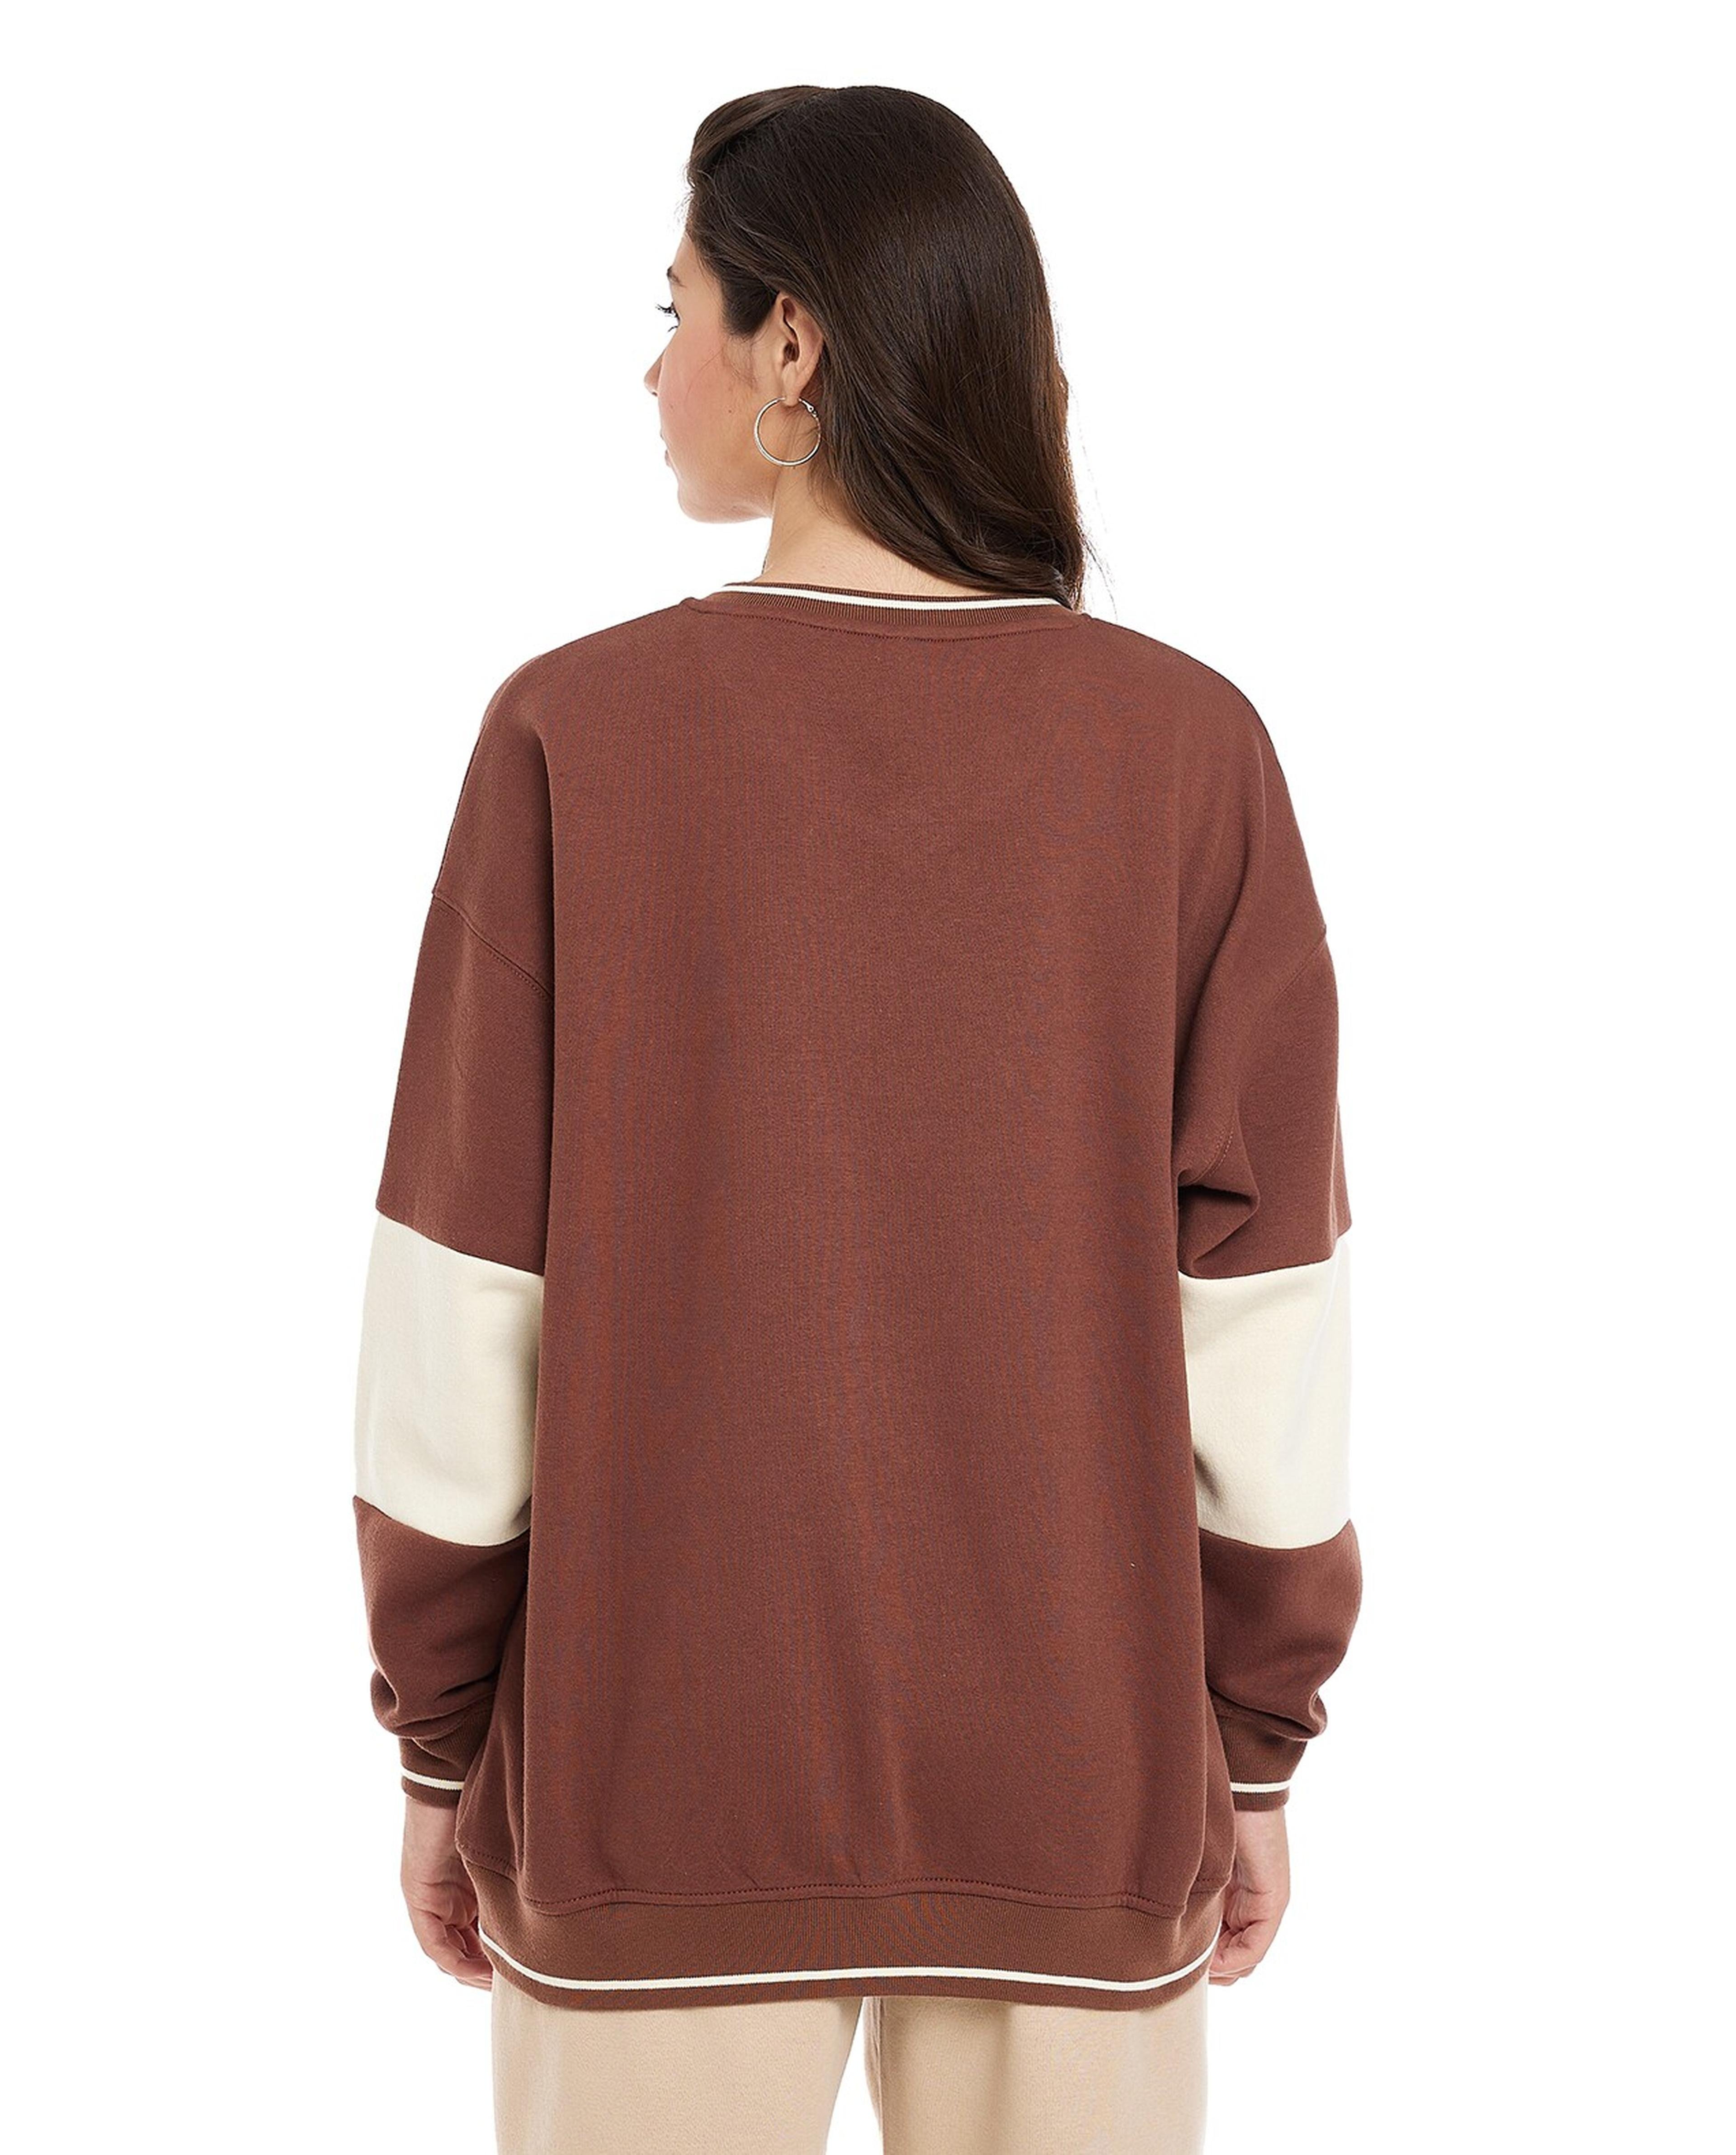 Color Block Sweatshirt with V-Neck and Long Sleeves